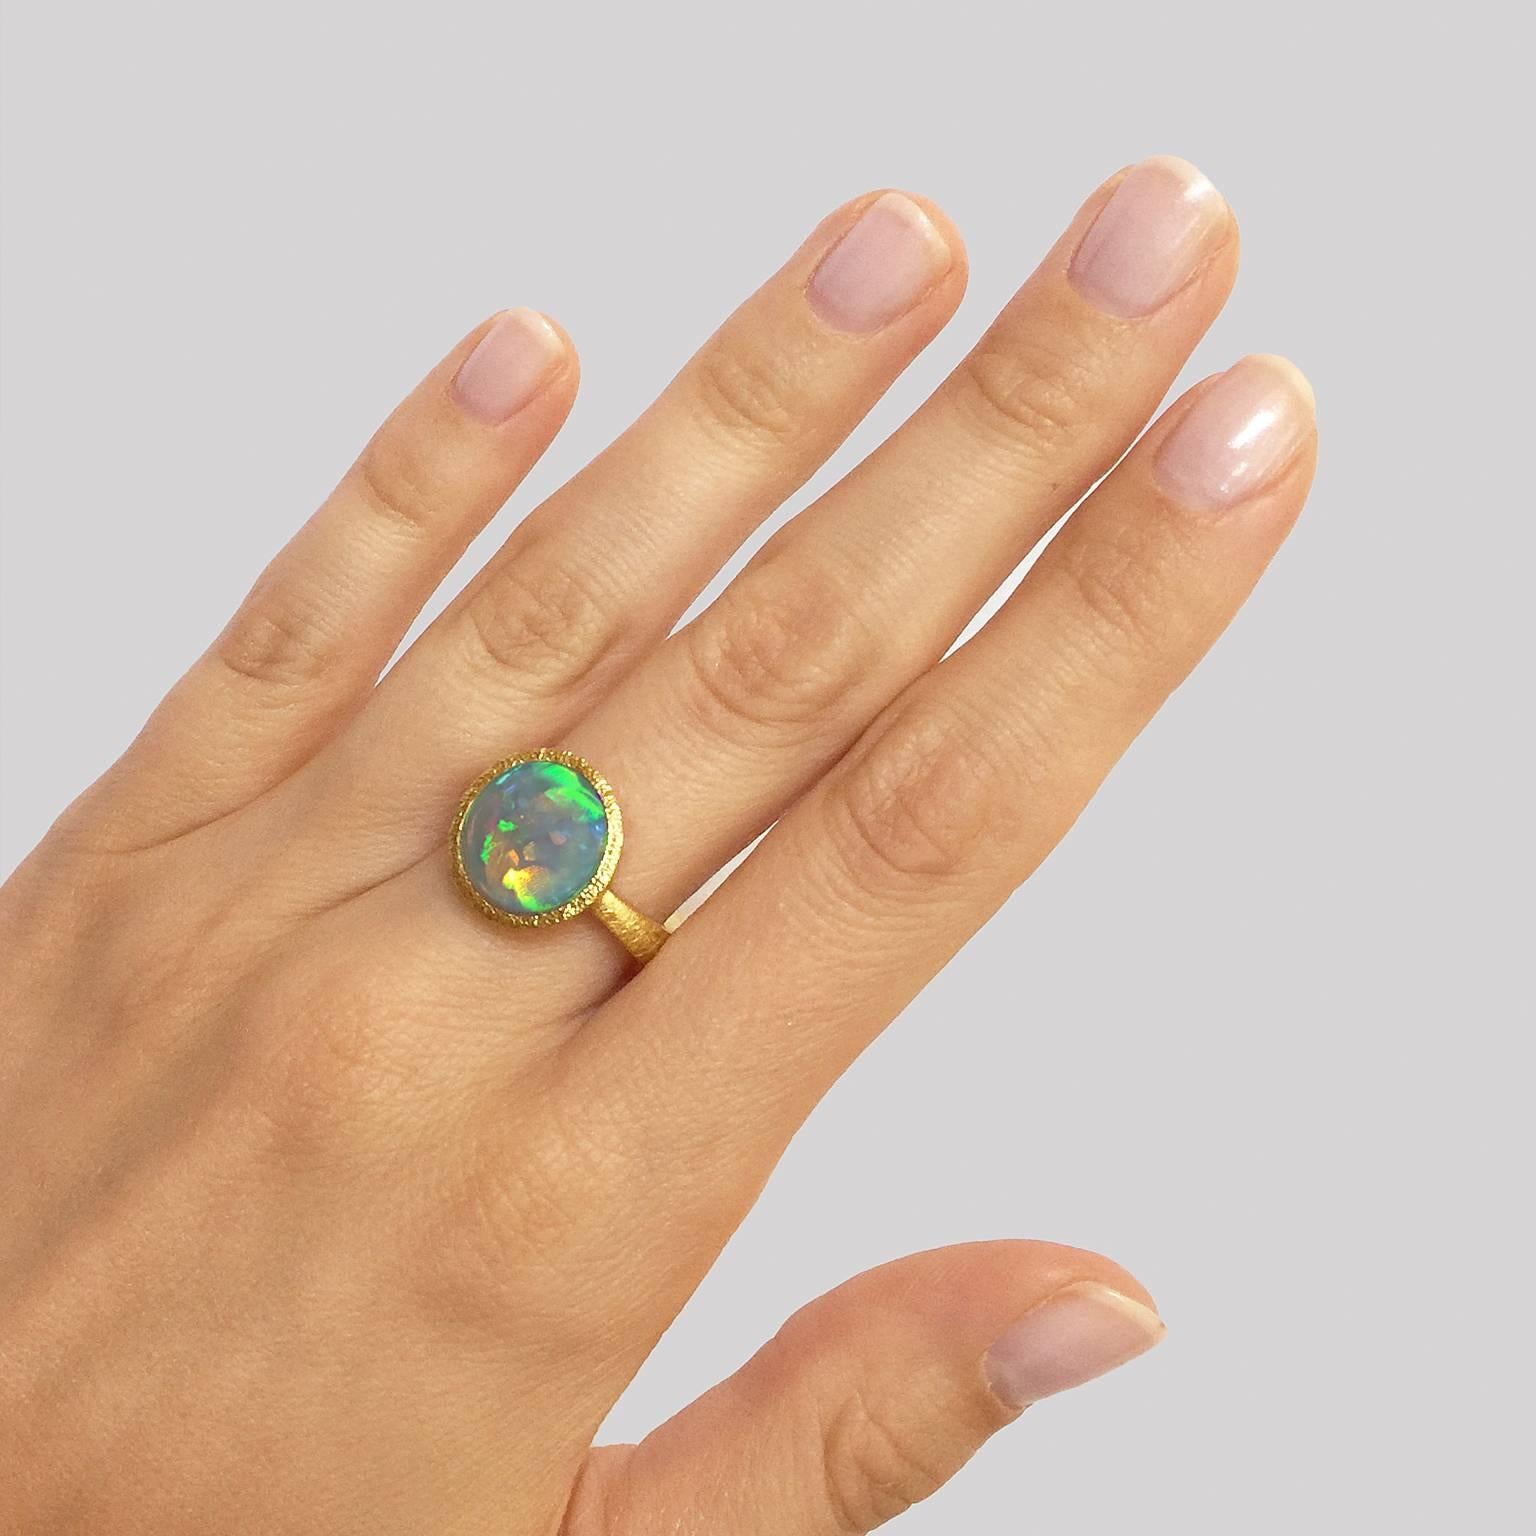 One of a Kind Ring by renowned jewelry artist Devta Doolan showcasing a spectacular and unique opal sourced from Lightning Ridge, Australia, home to the finest black opal mines in the world. The ring is handmade with the gemstone set in a tapered